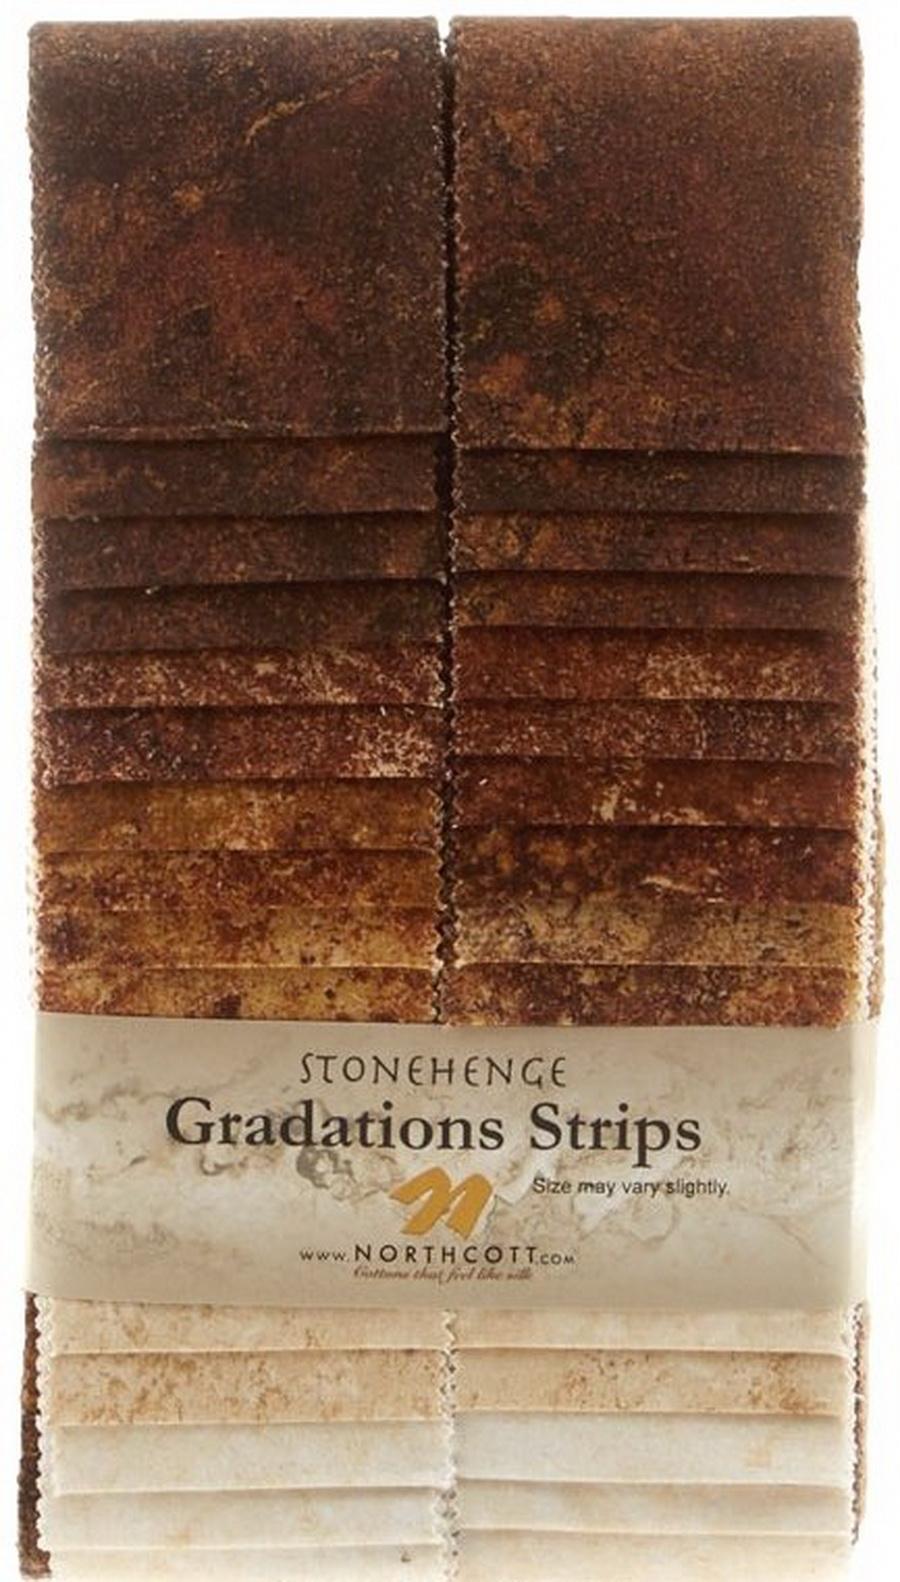 Stonehenge Gradations Brights Iron Ore - 2.5 inch wide Strips 40 Pieces